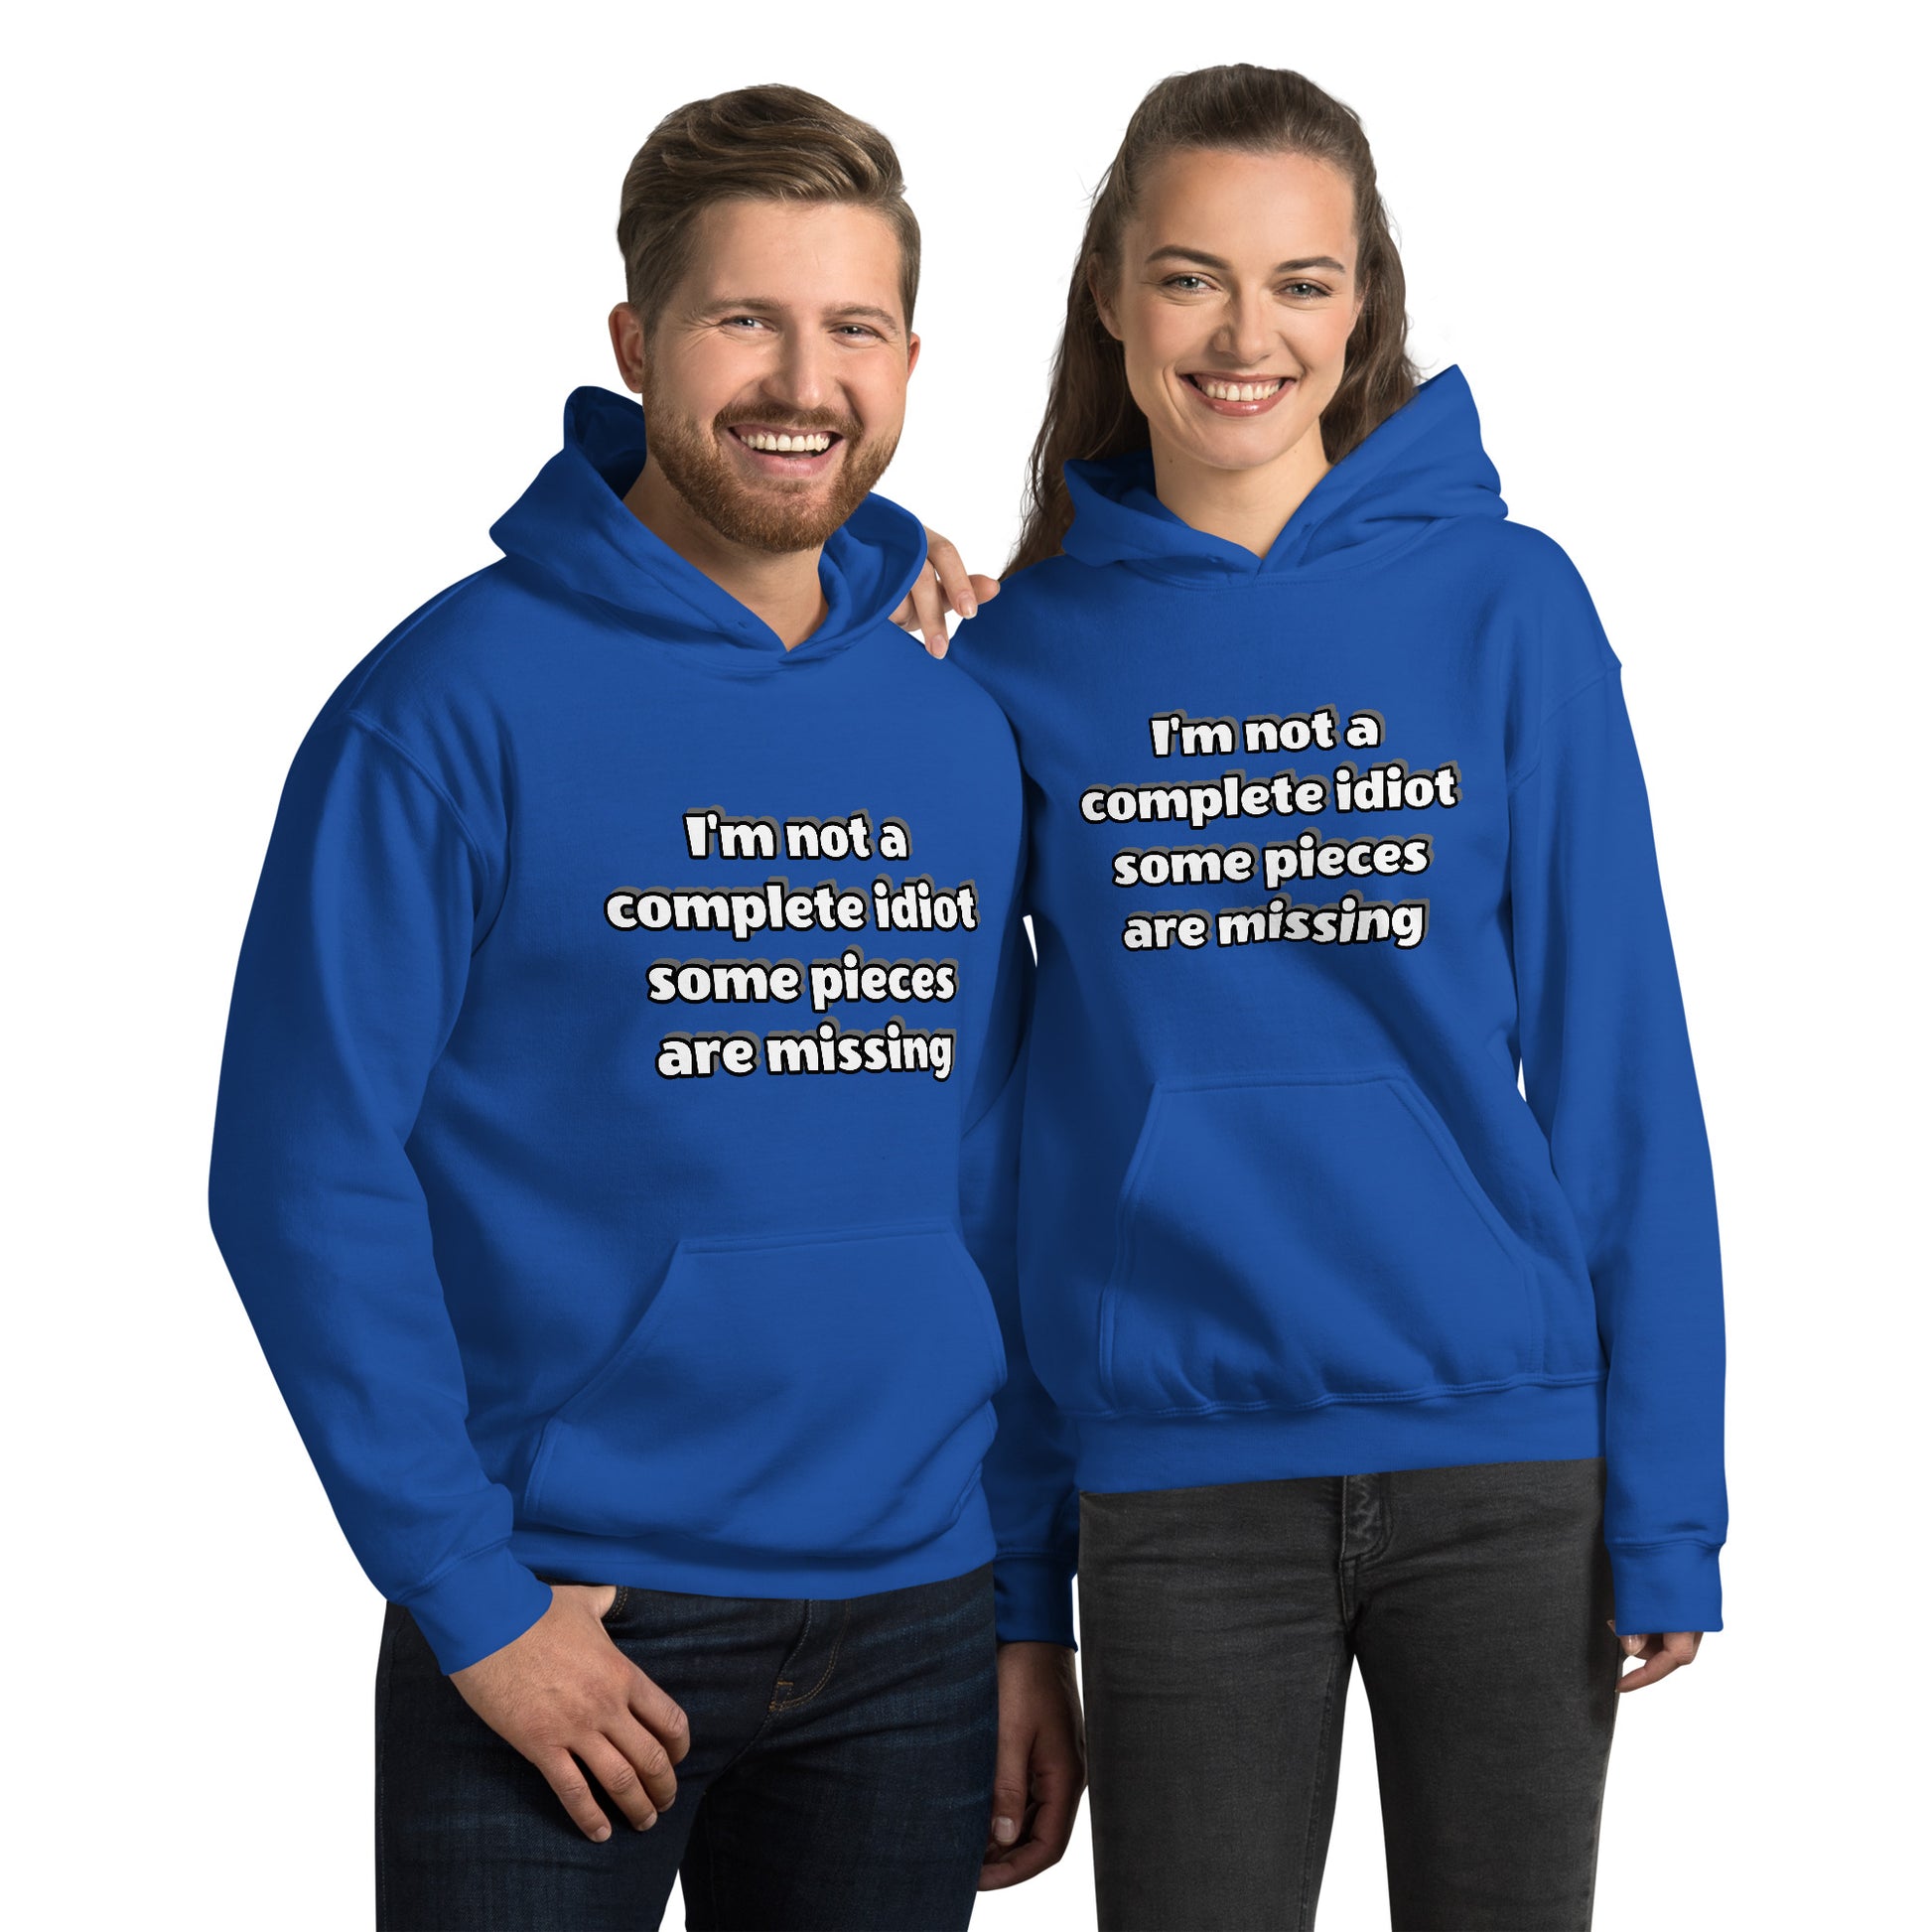 Men and women with royal blue hoodie with text “I’m not a complete idiot, some pieces are missing”